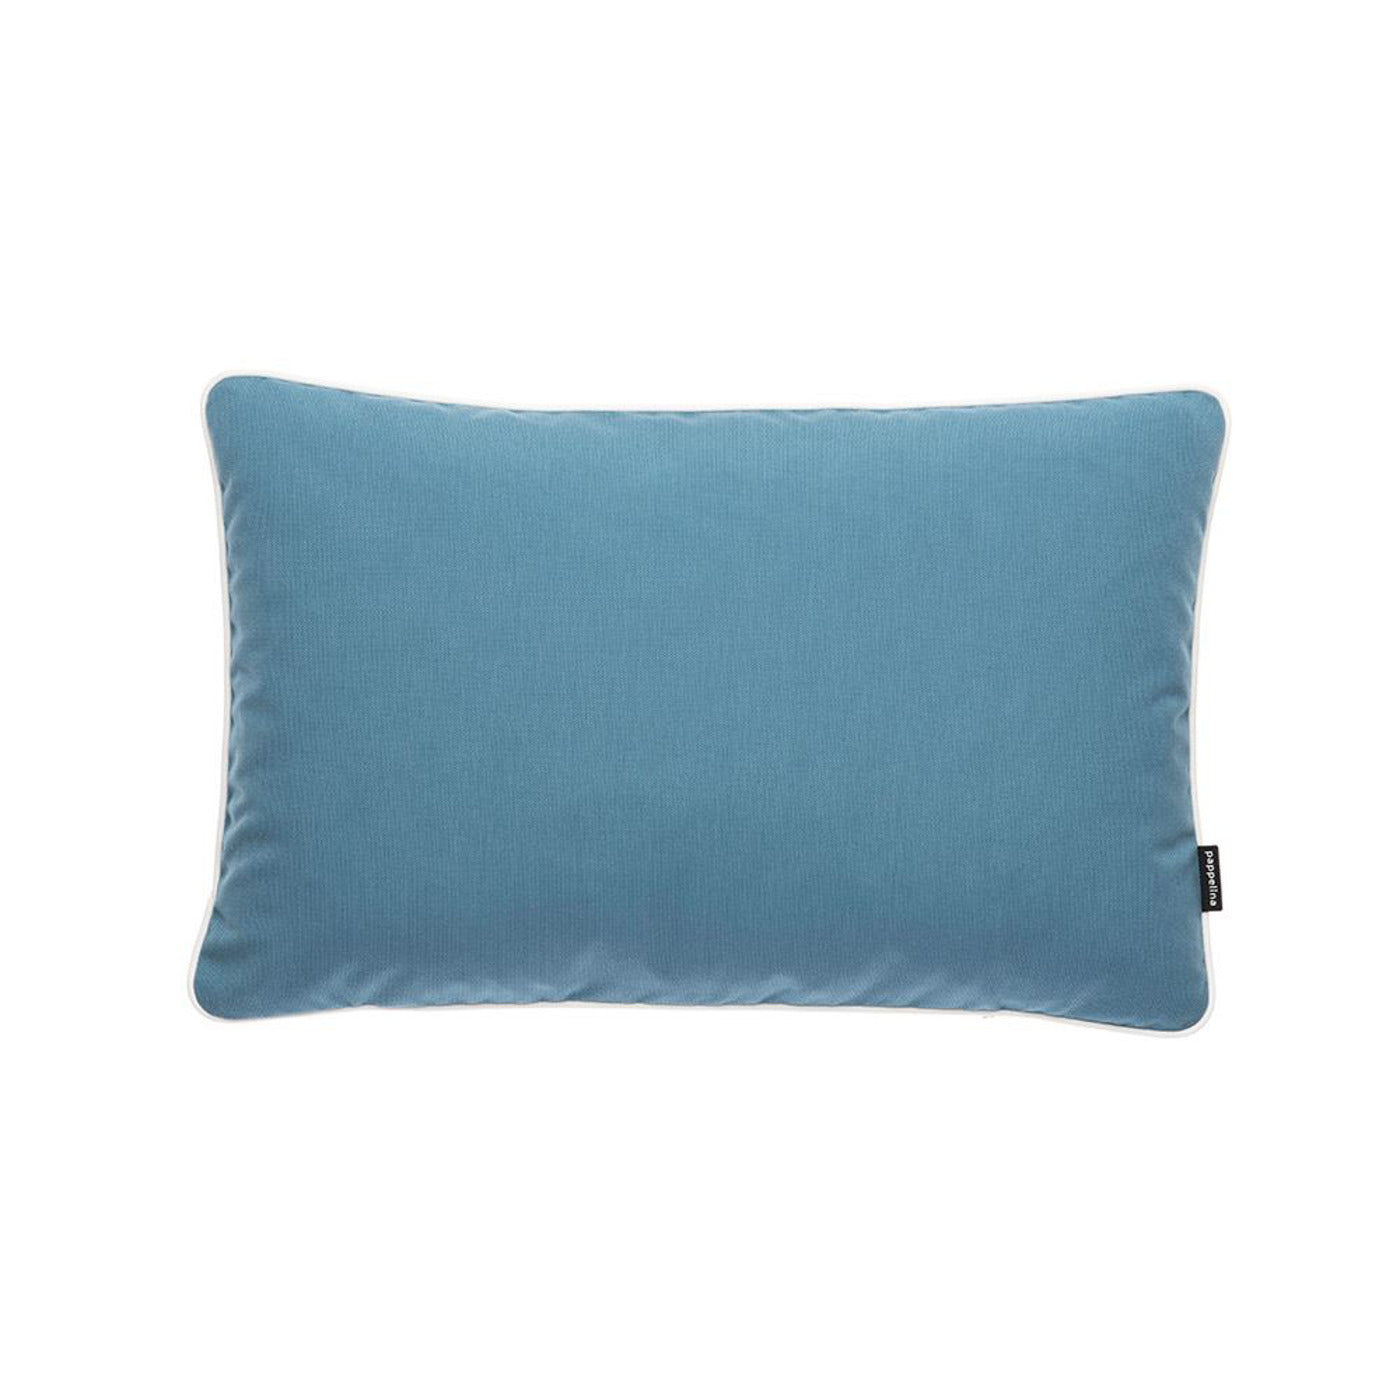 Pappelina Cushion / pillow for indoor and outdoor use SUNNY Petrol